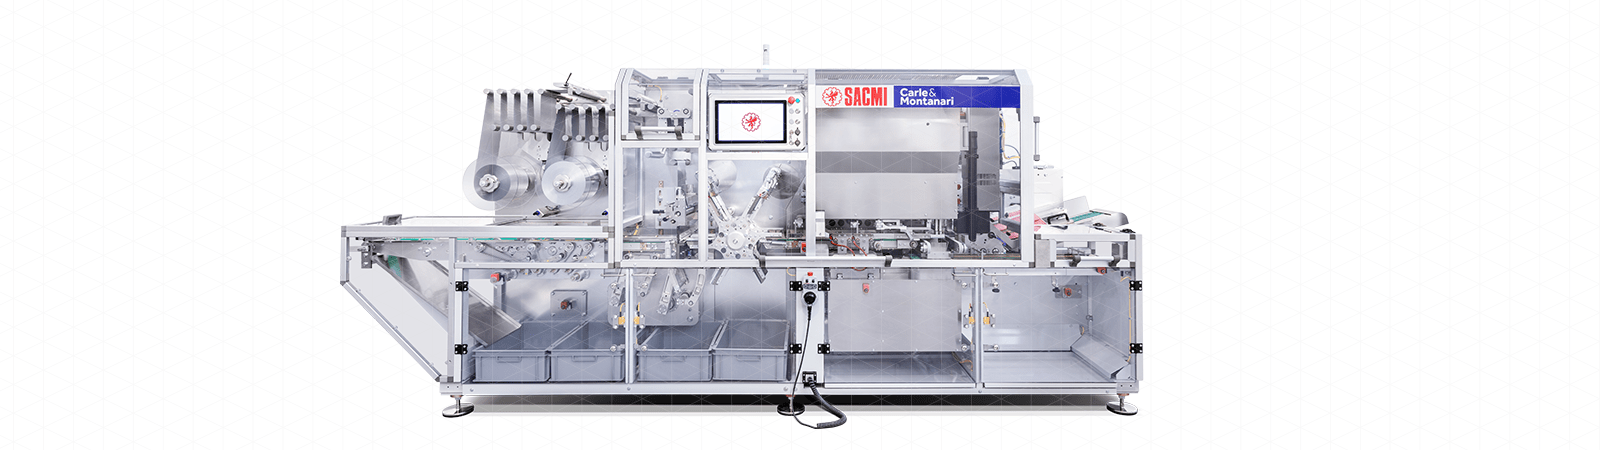 HTB: SACMI Packaging & Chocolate presents a new electronic wrapping machine for chocolate bars and tablets, the fastest on the market